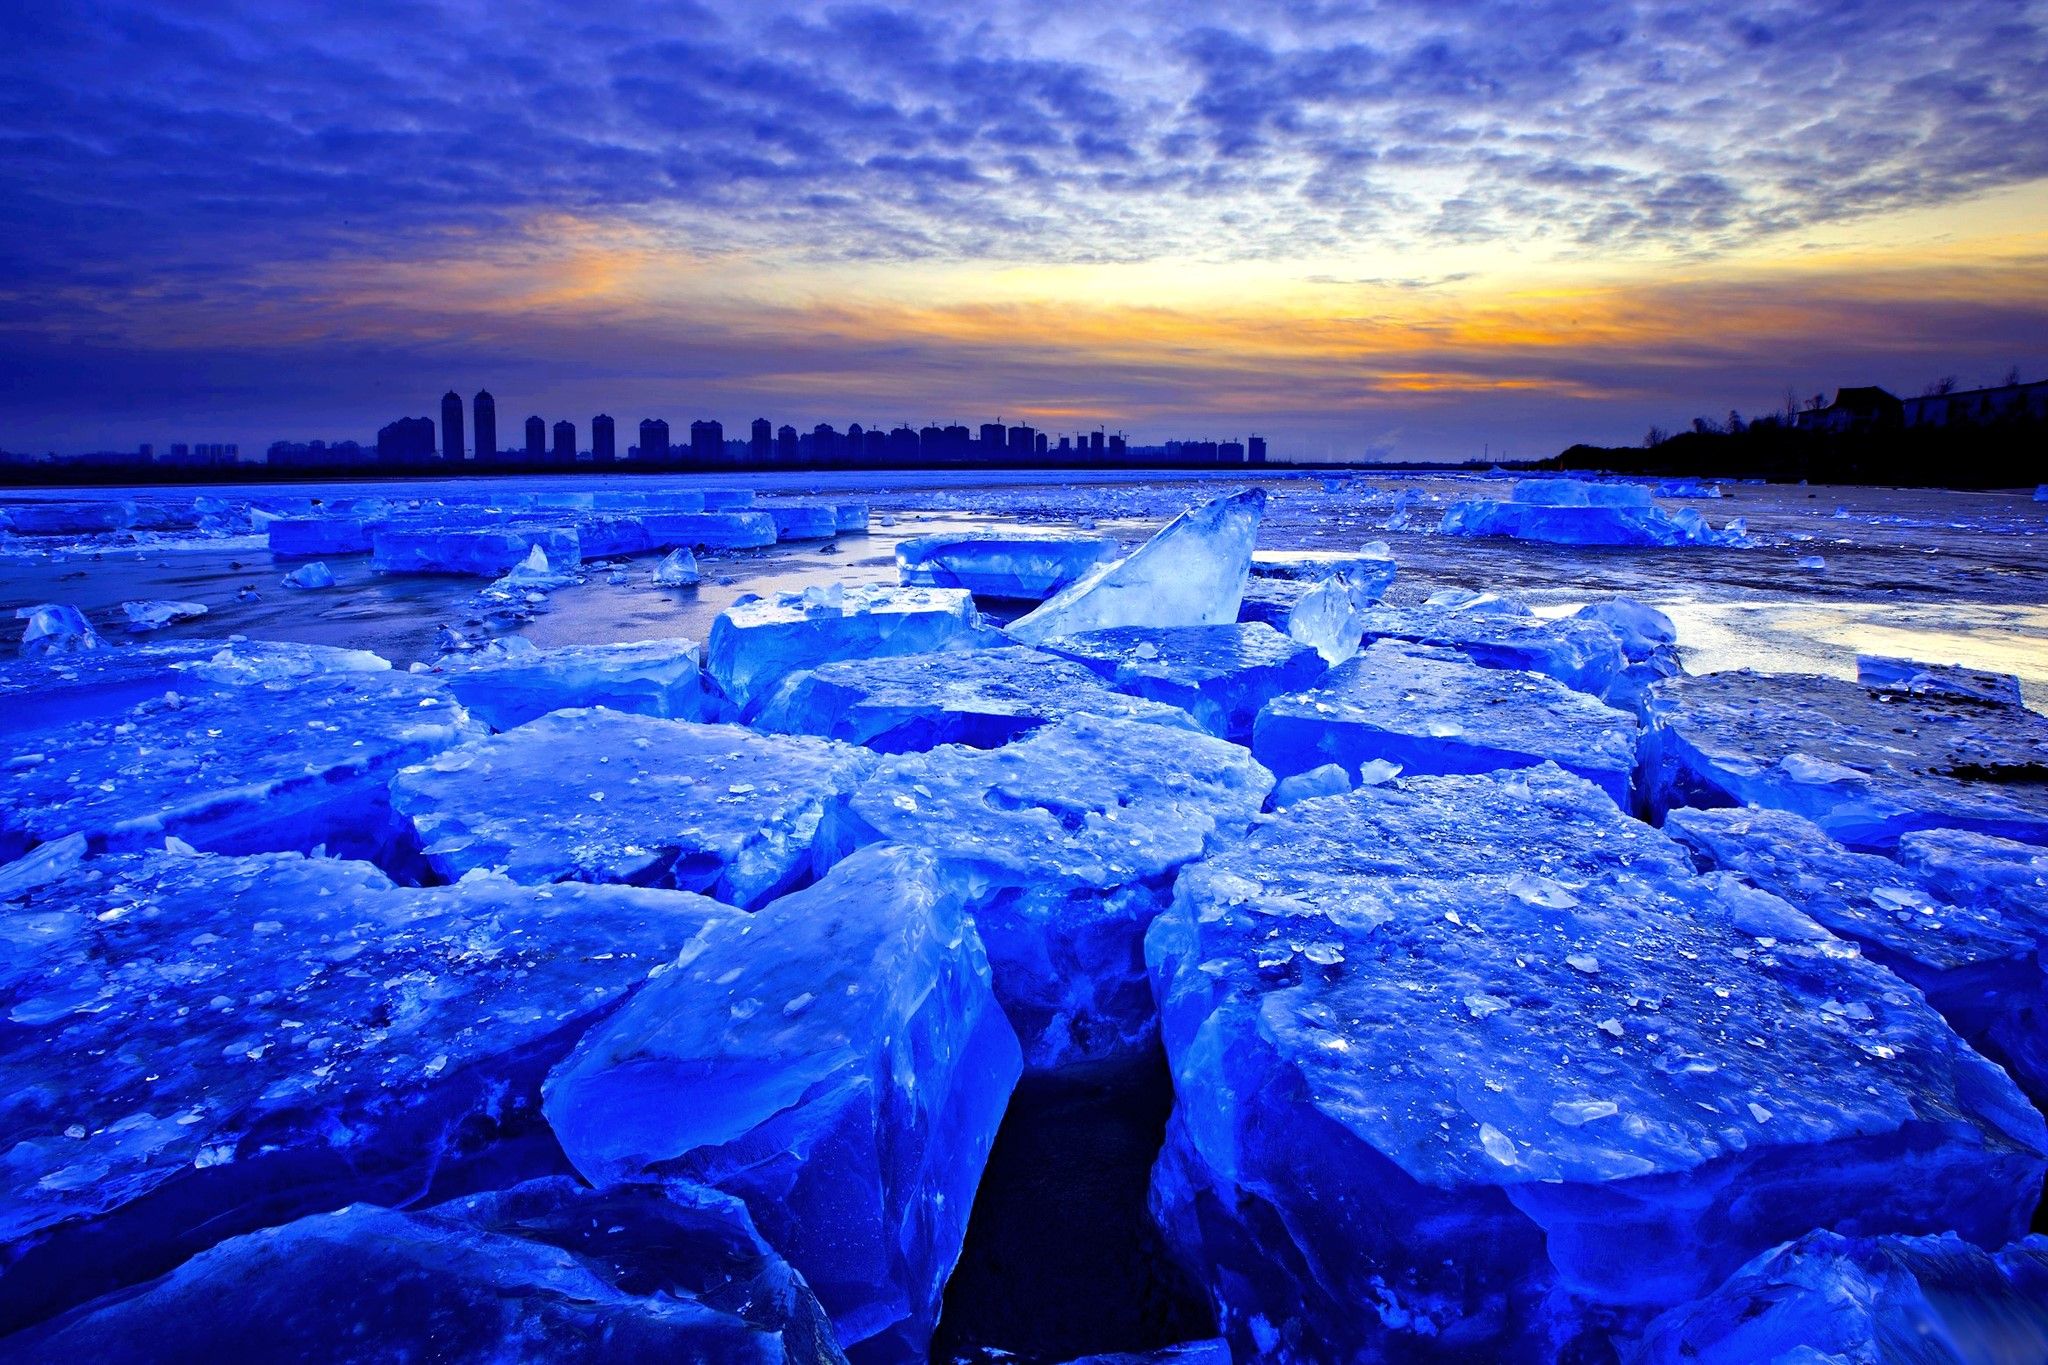 Blue ice in the foreground with a city skyline in the distance - Ice